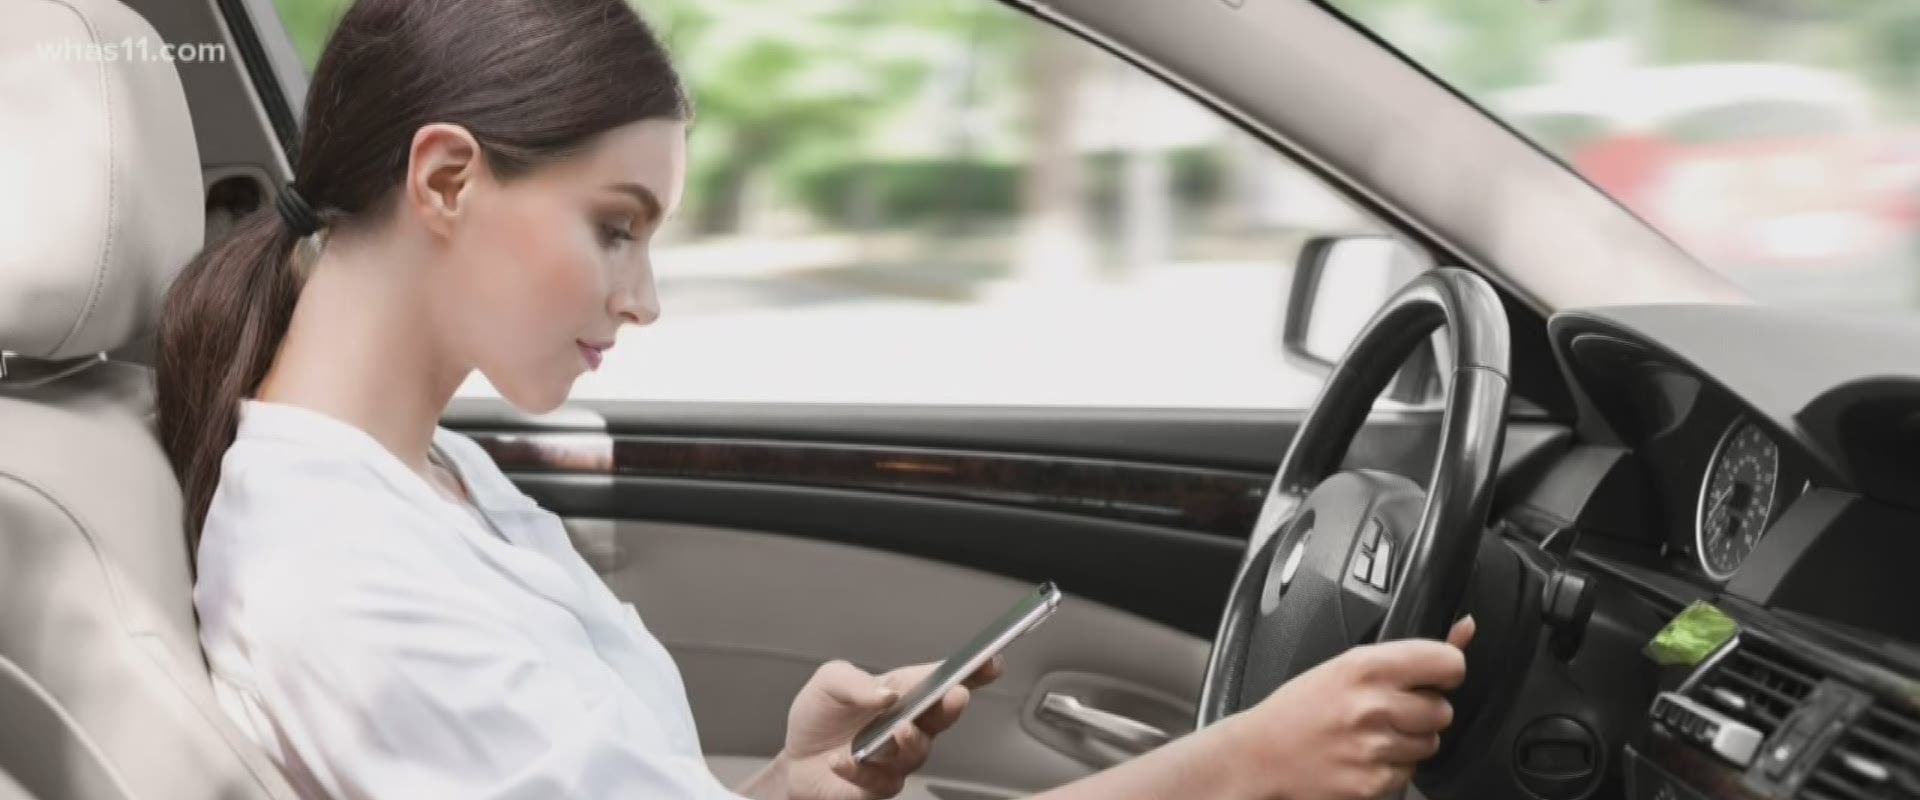 Distracted Driving Laws in Indianapolis, Indiana: What You Need to Know